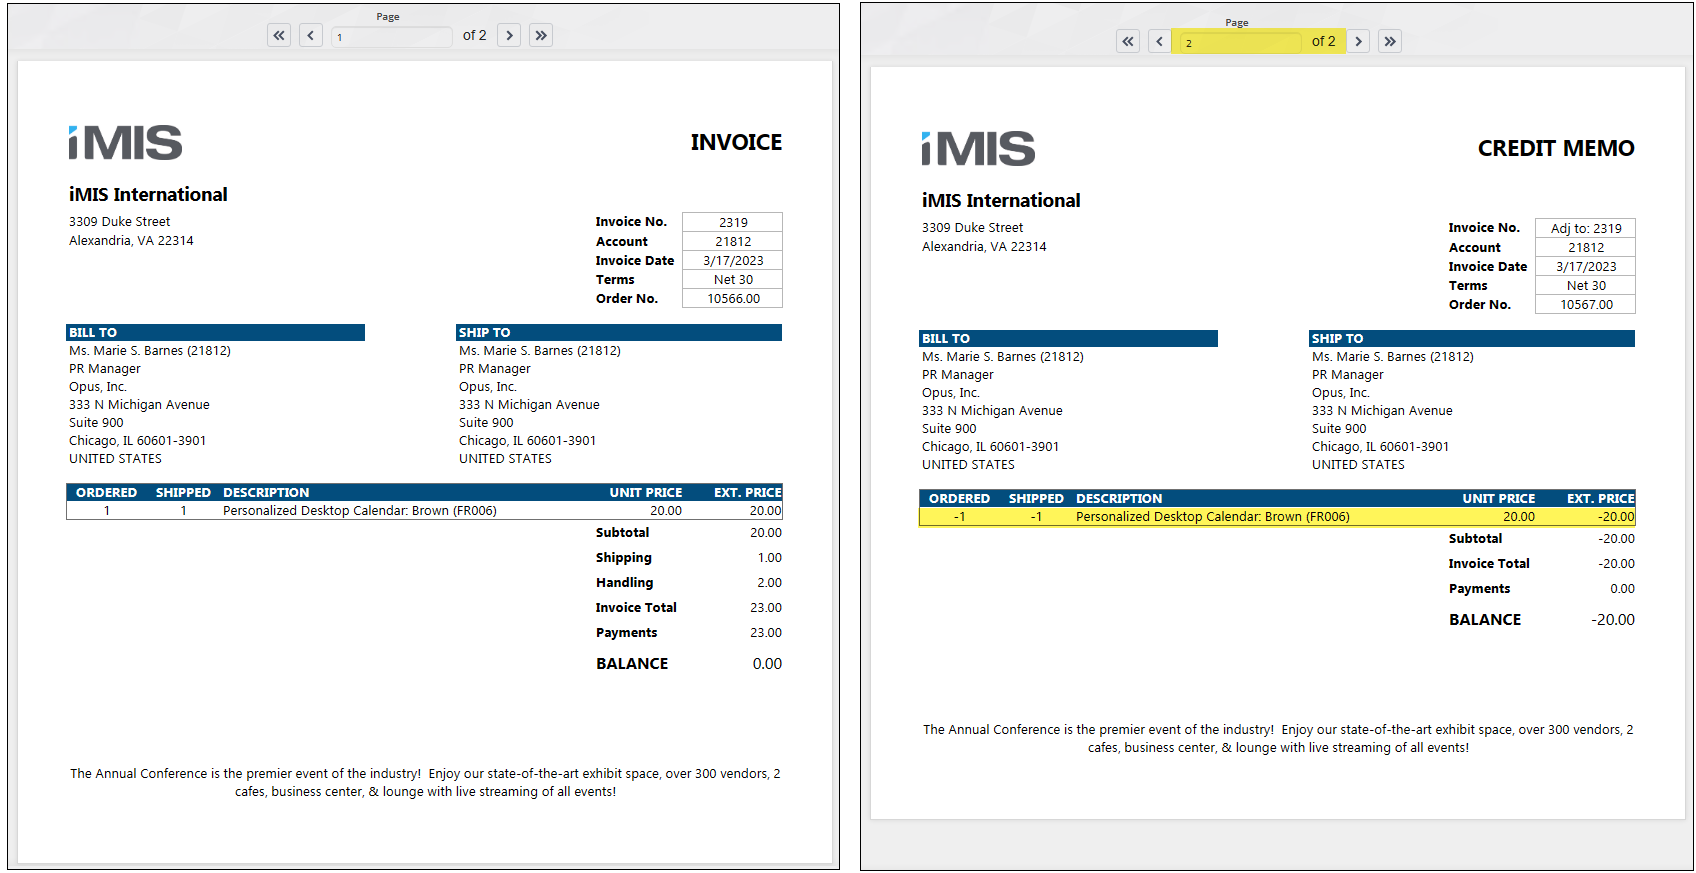 Reviewing the original invoice and the new credit memo invoice